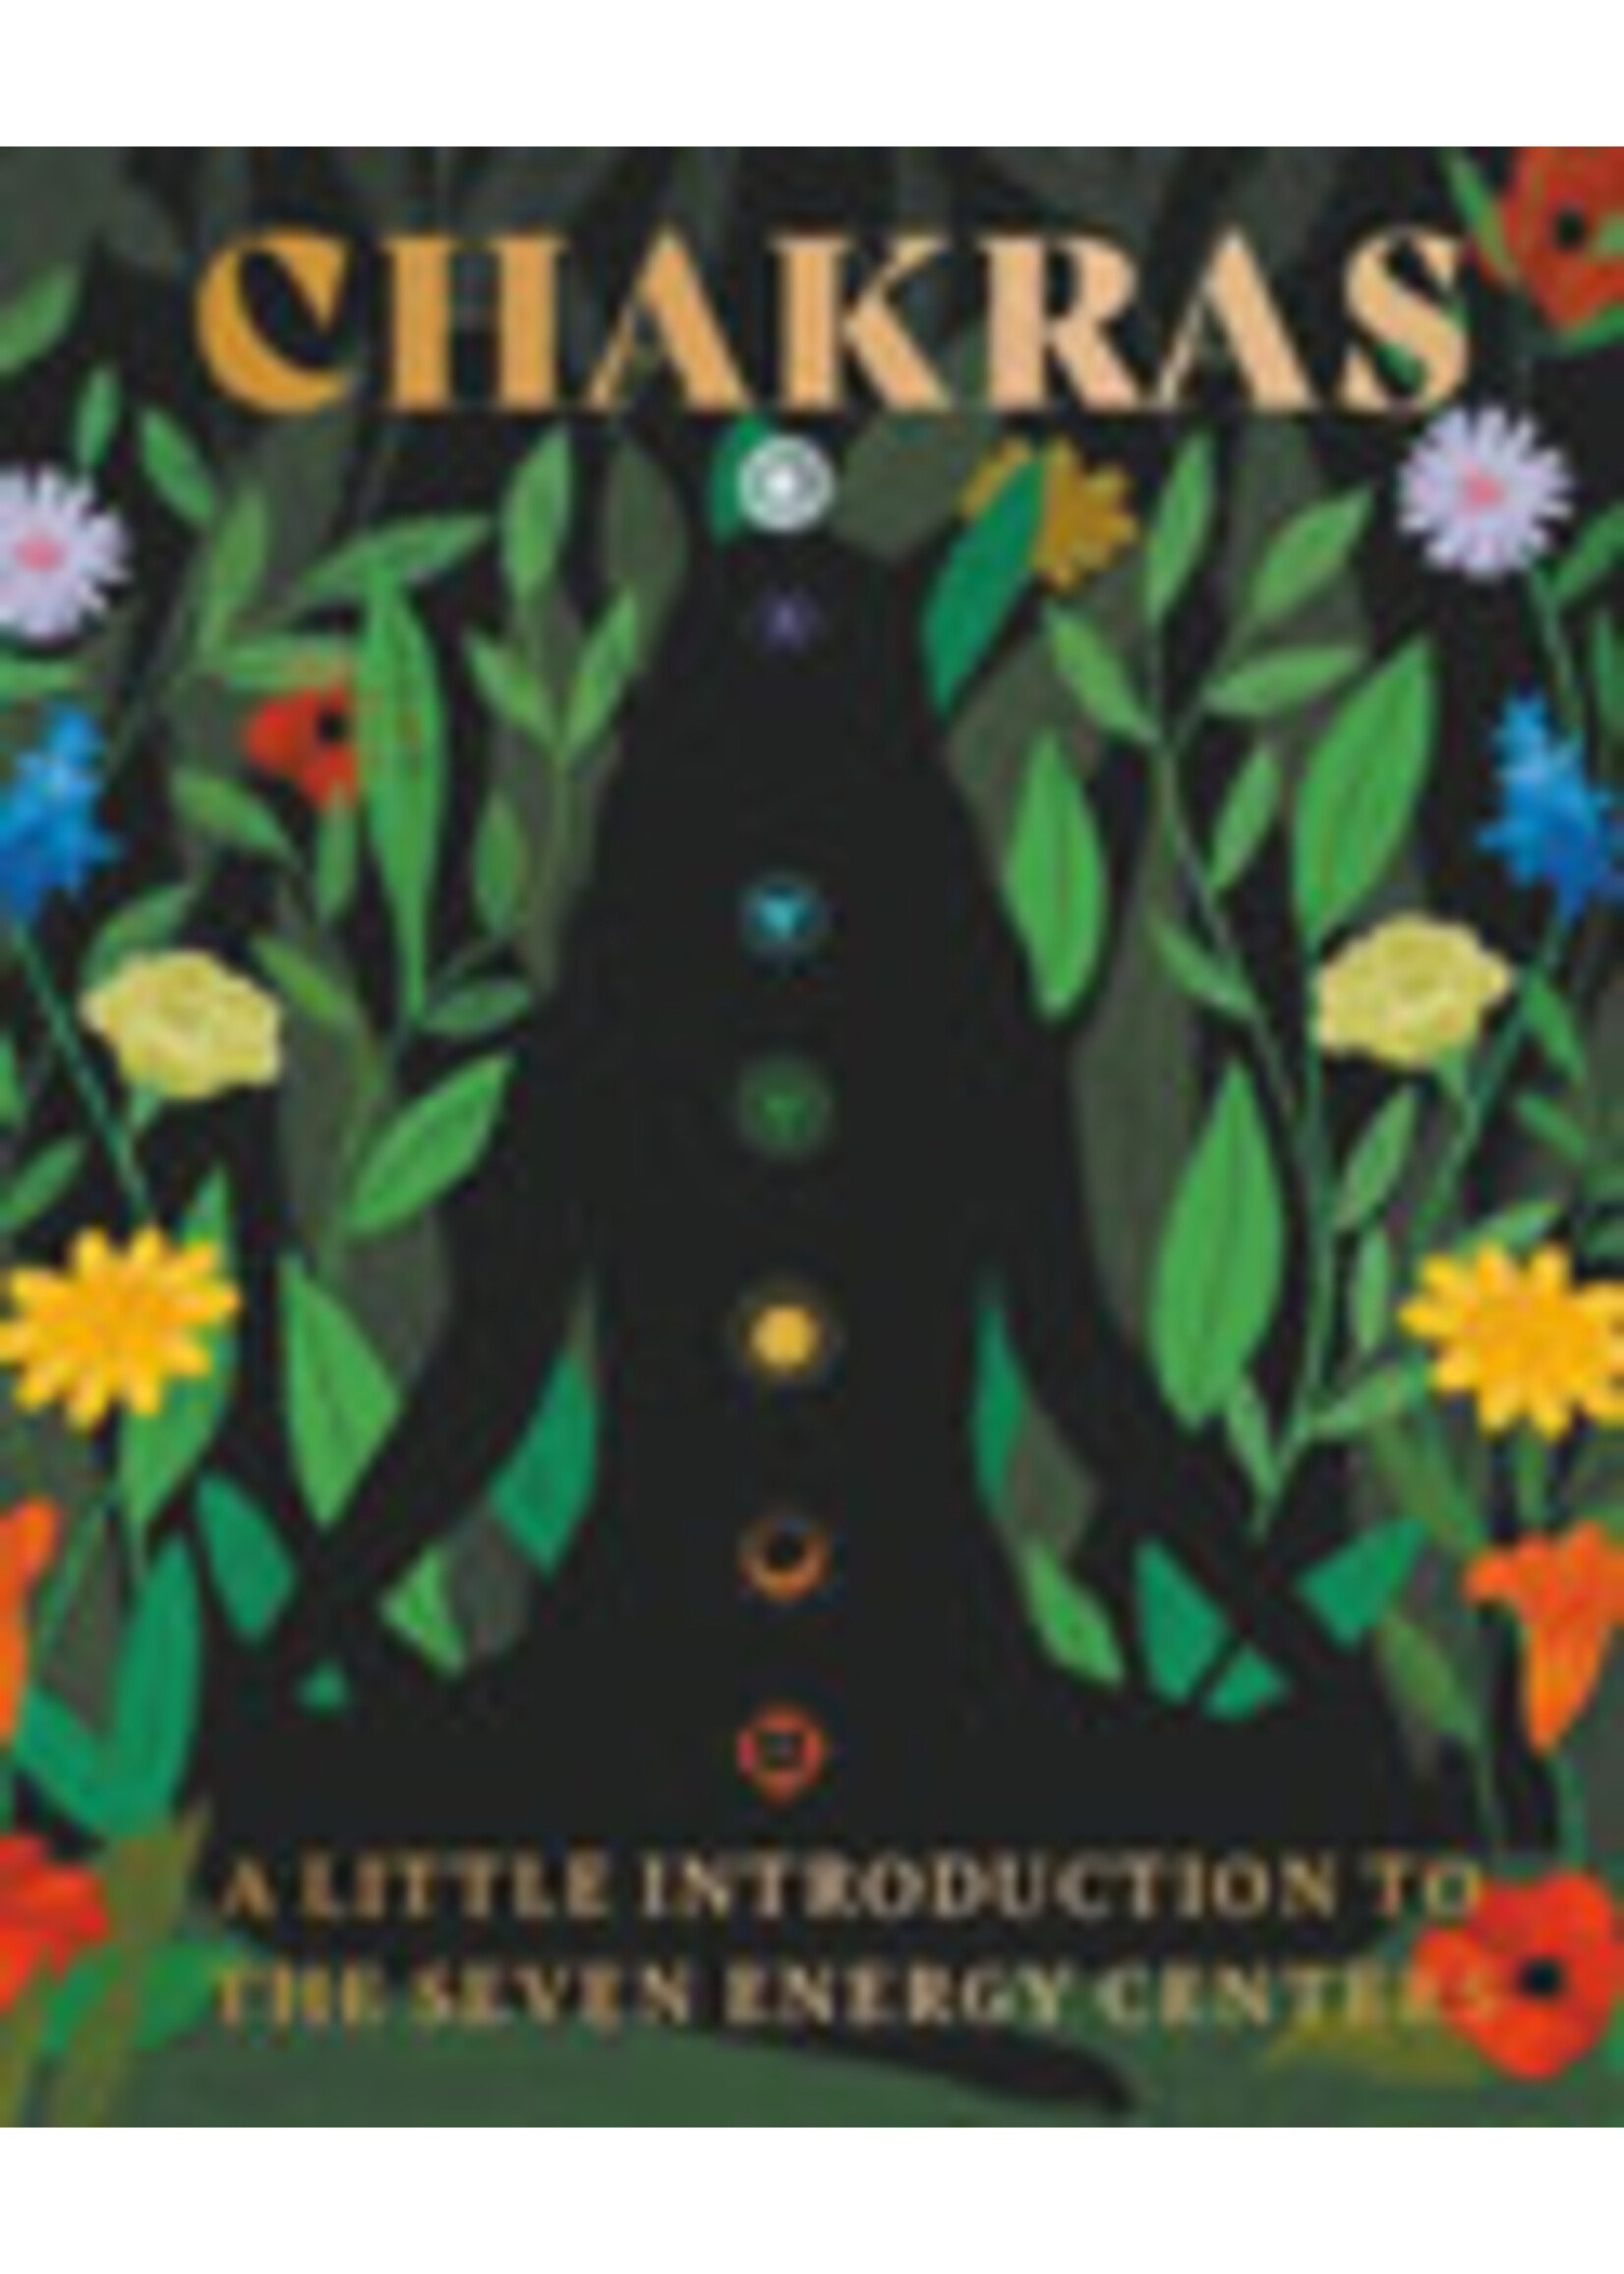 Chakras: A Little Introduction to The Seven Energy Centers